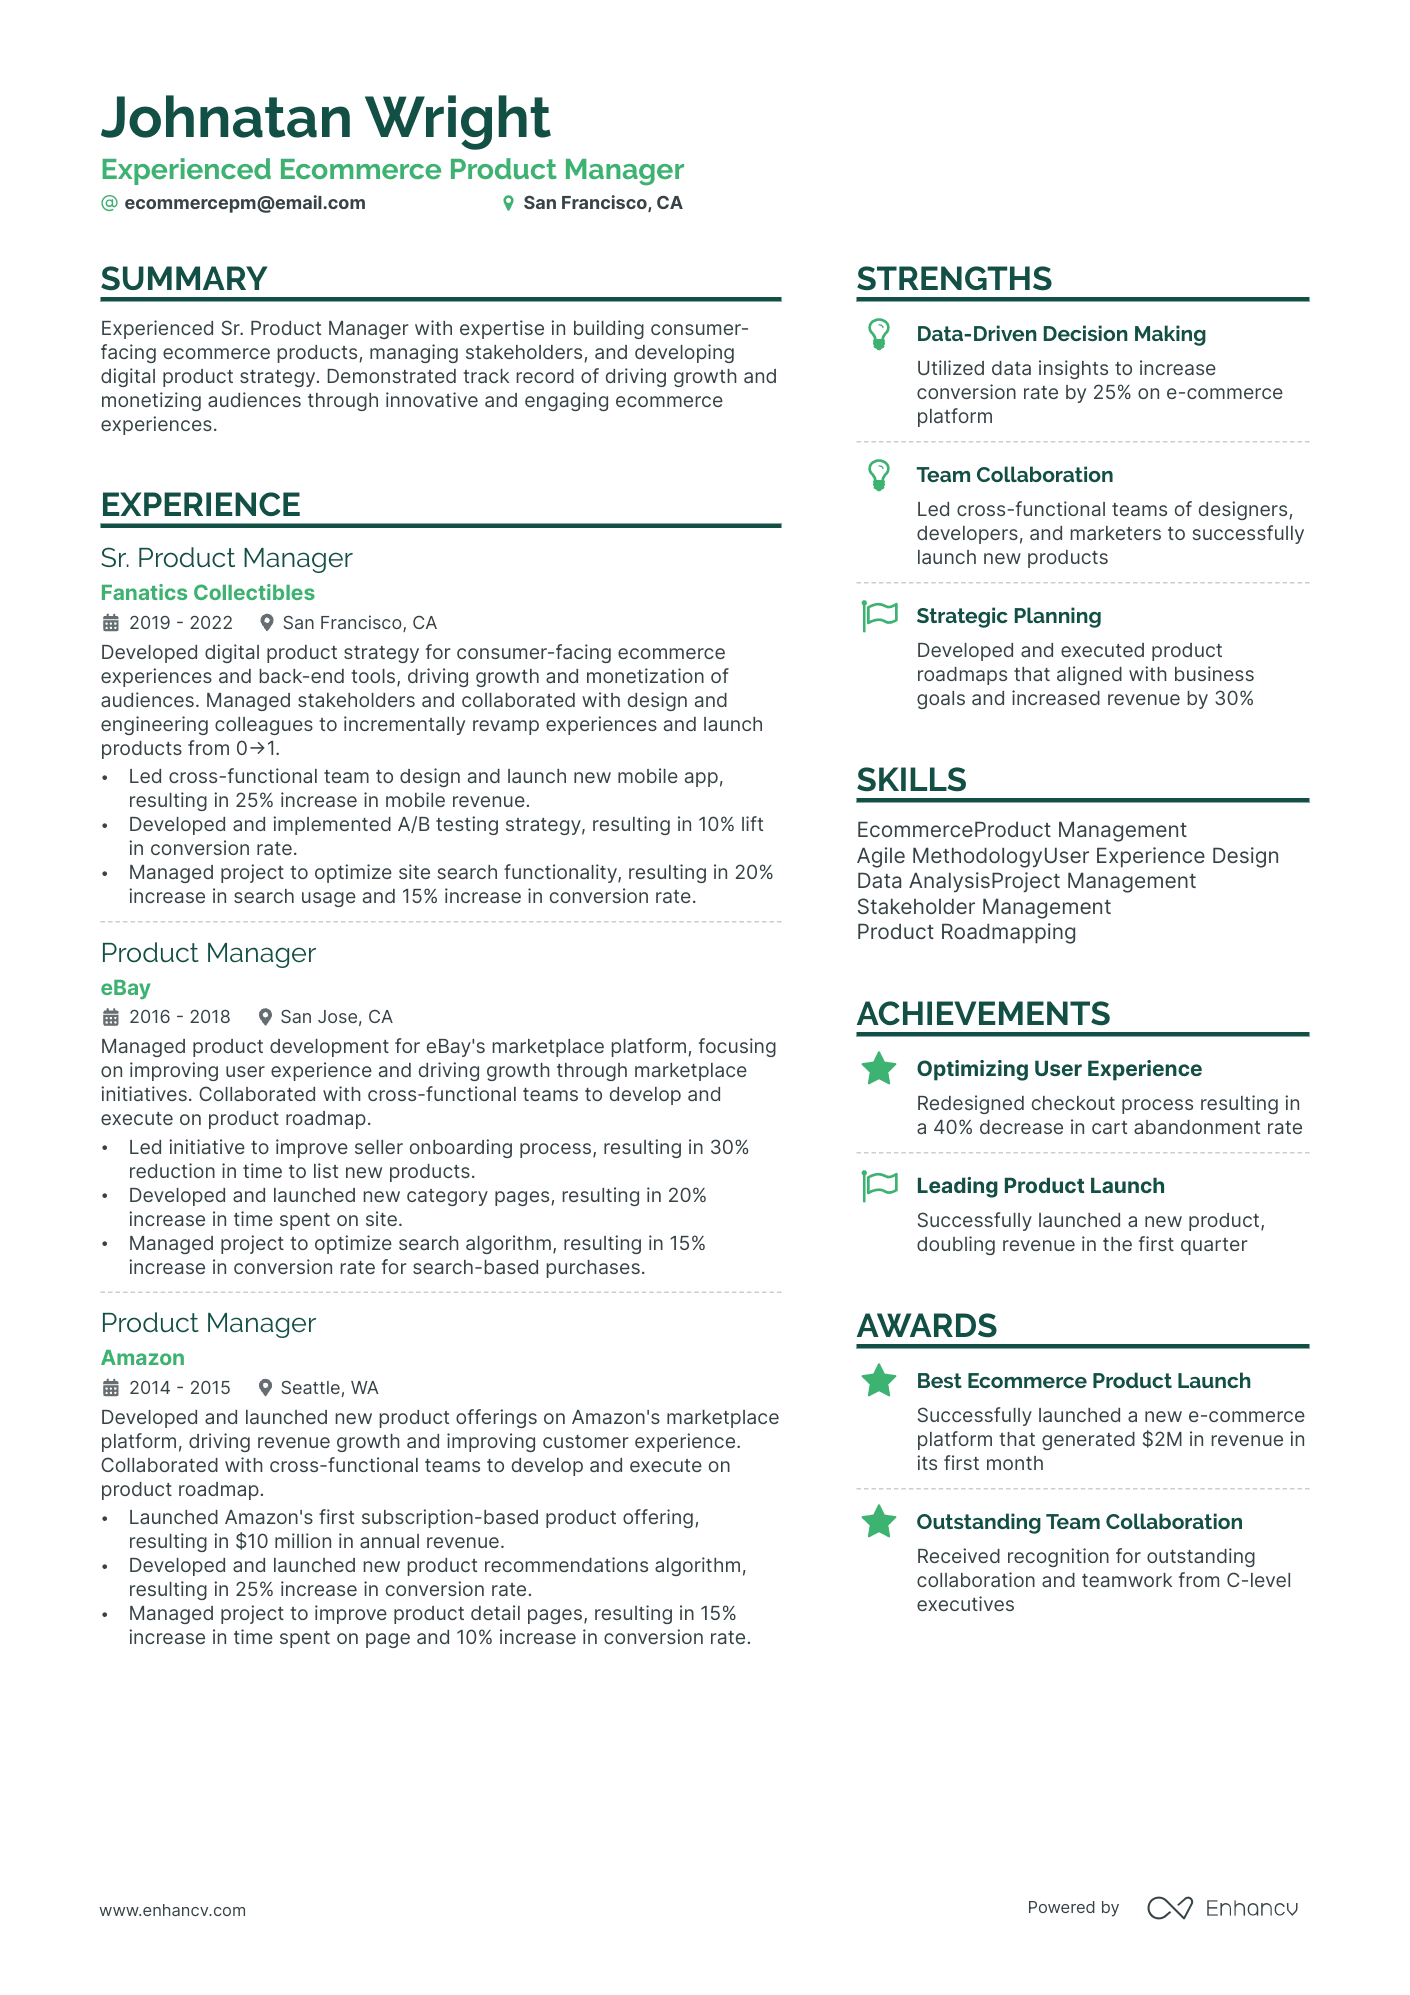 Ecommerce Product Manager resume example